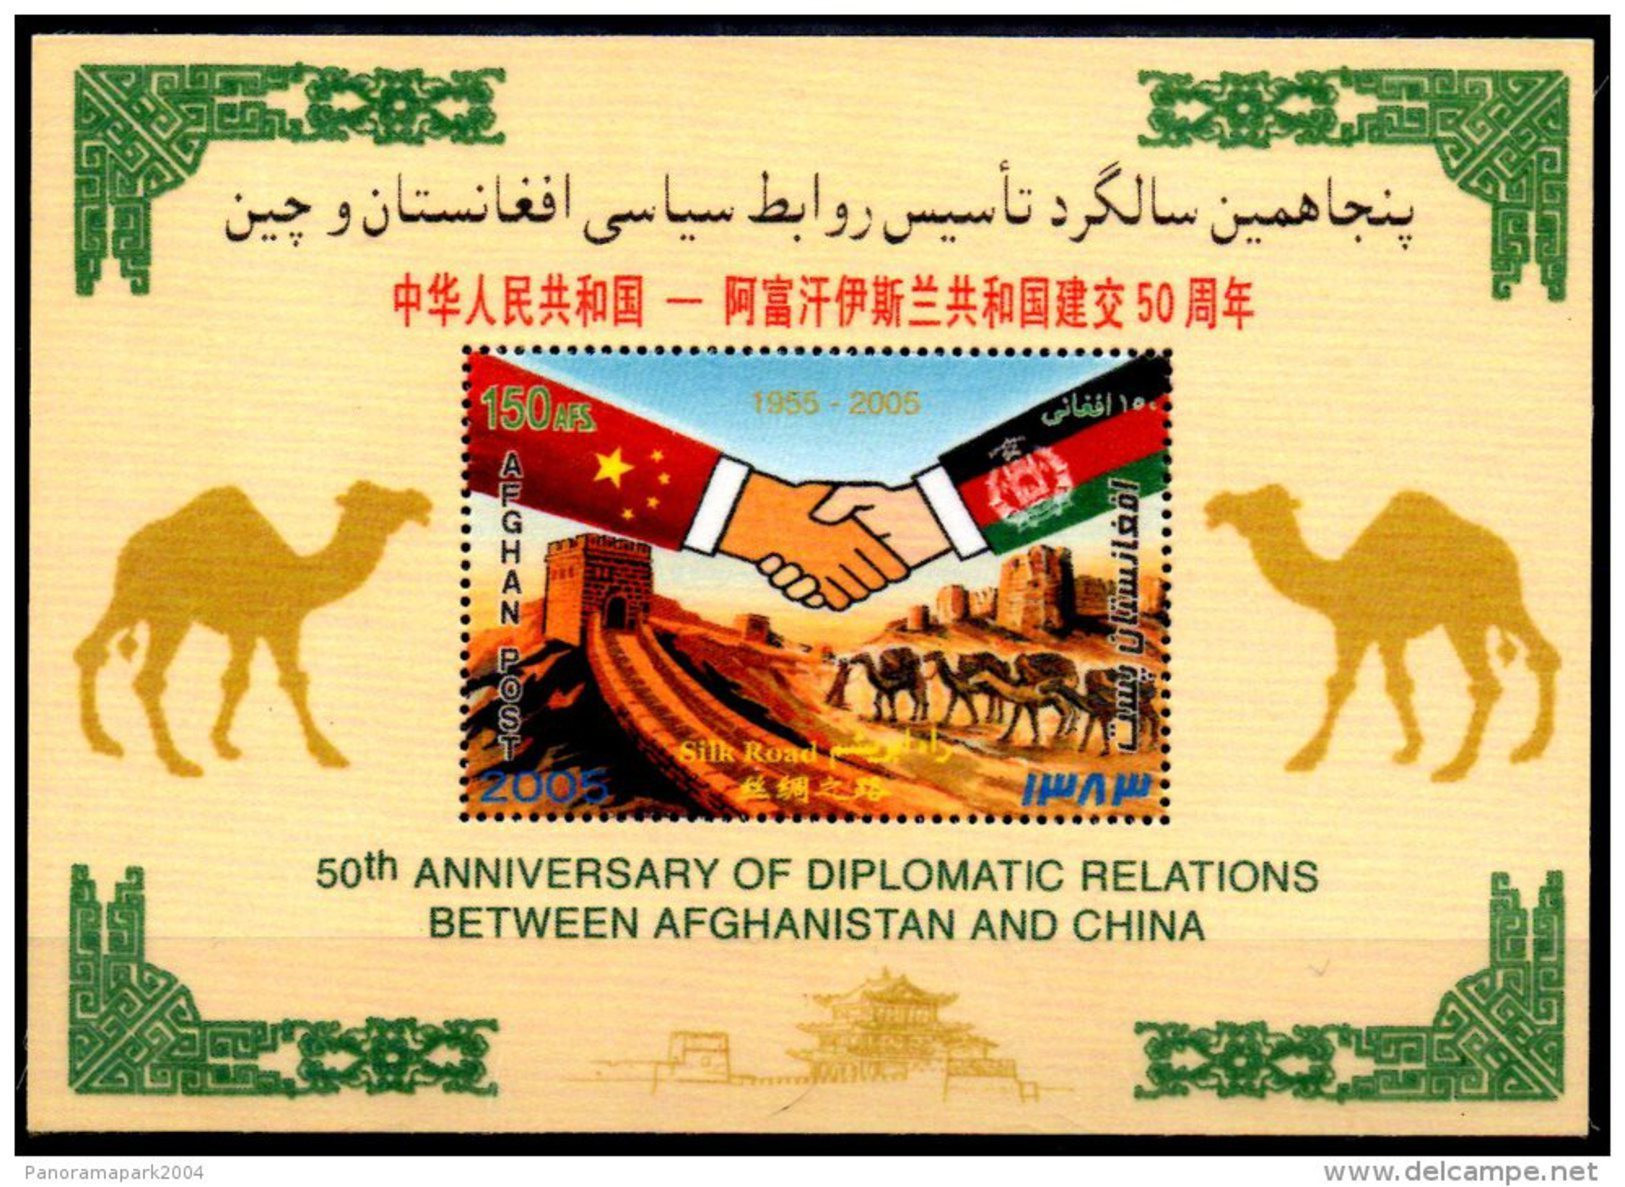 Afghanistan - China Joint Issue 2006 50th Anniversary Diplomatic Relations Camel Silk Road Silk Sheet - Afghanistan